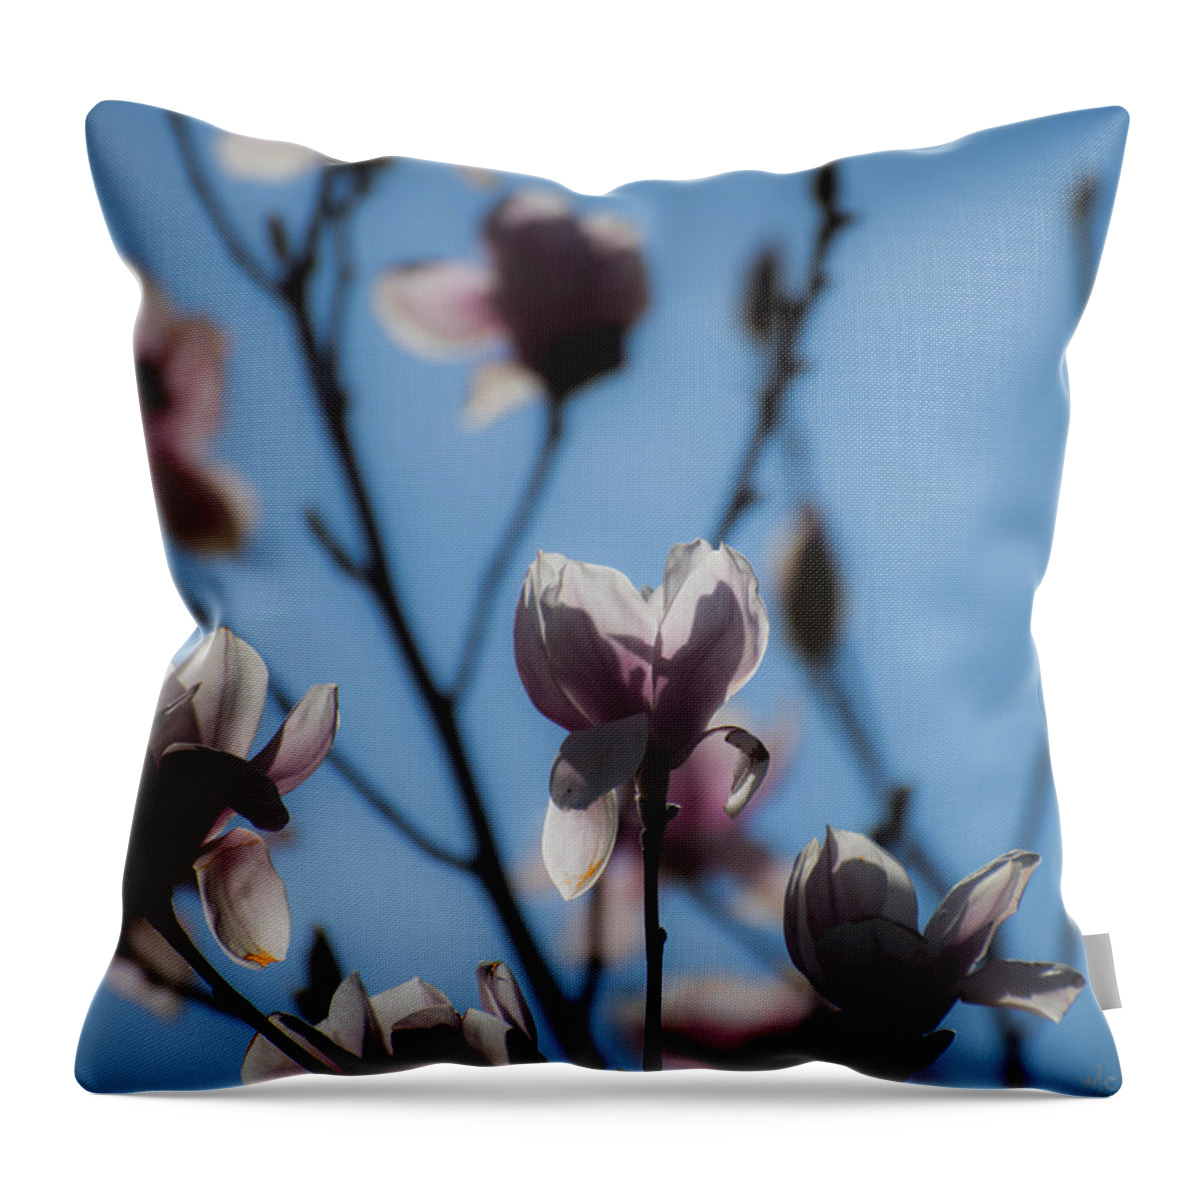 Flowers Throw Pillow featuring the photograph Morning Beauty by Wendy Carrington